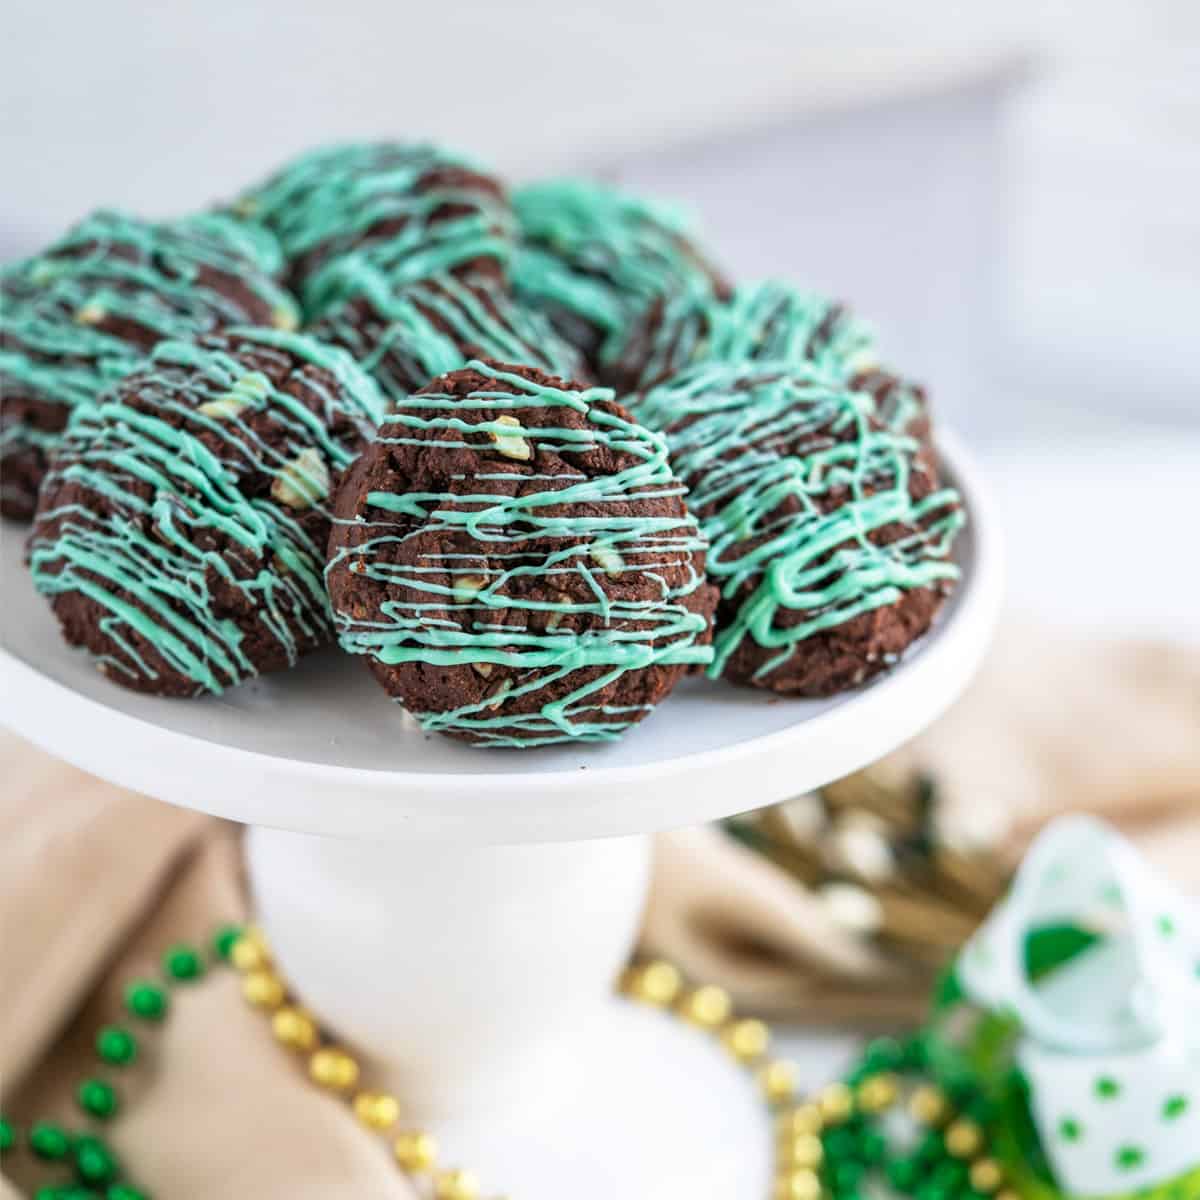 Finished double chocolate mint cookies on a white pedestal for St. Patrick's Day.